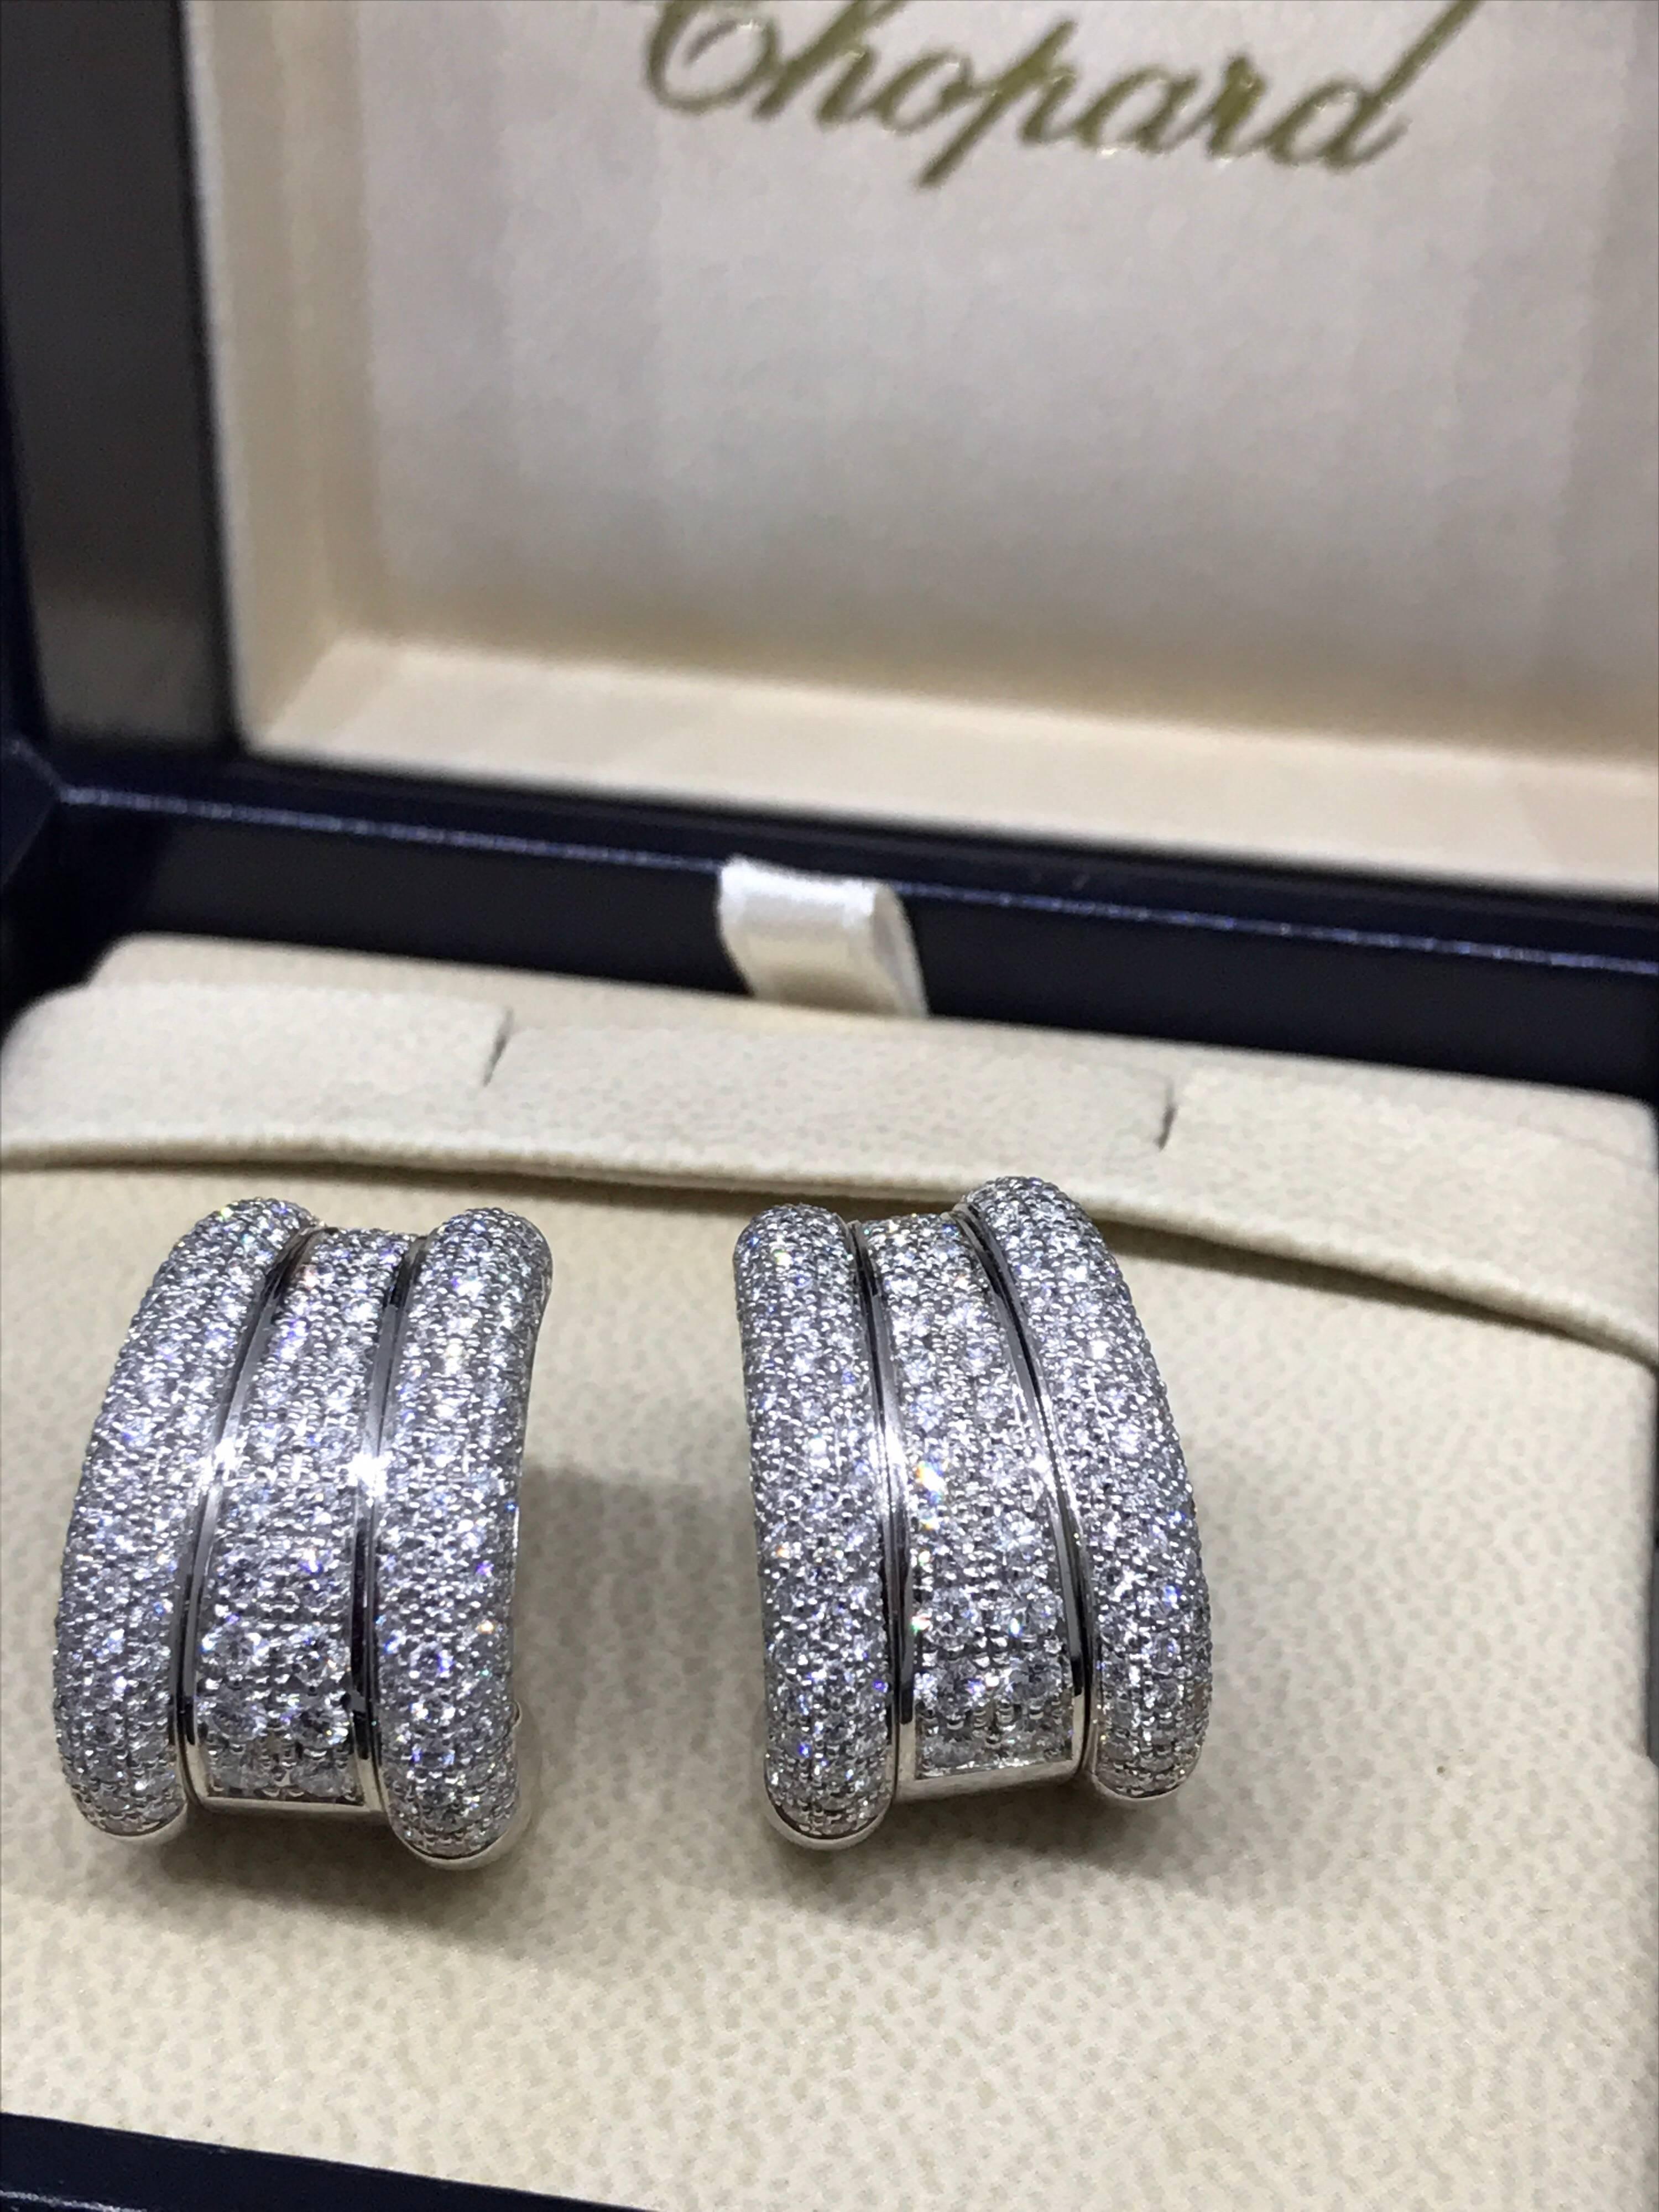 Chopard La Strada 18 Karat White Gold Pave Diamond Earrings In New Condition For Sale In New York, NY